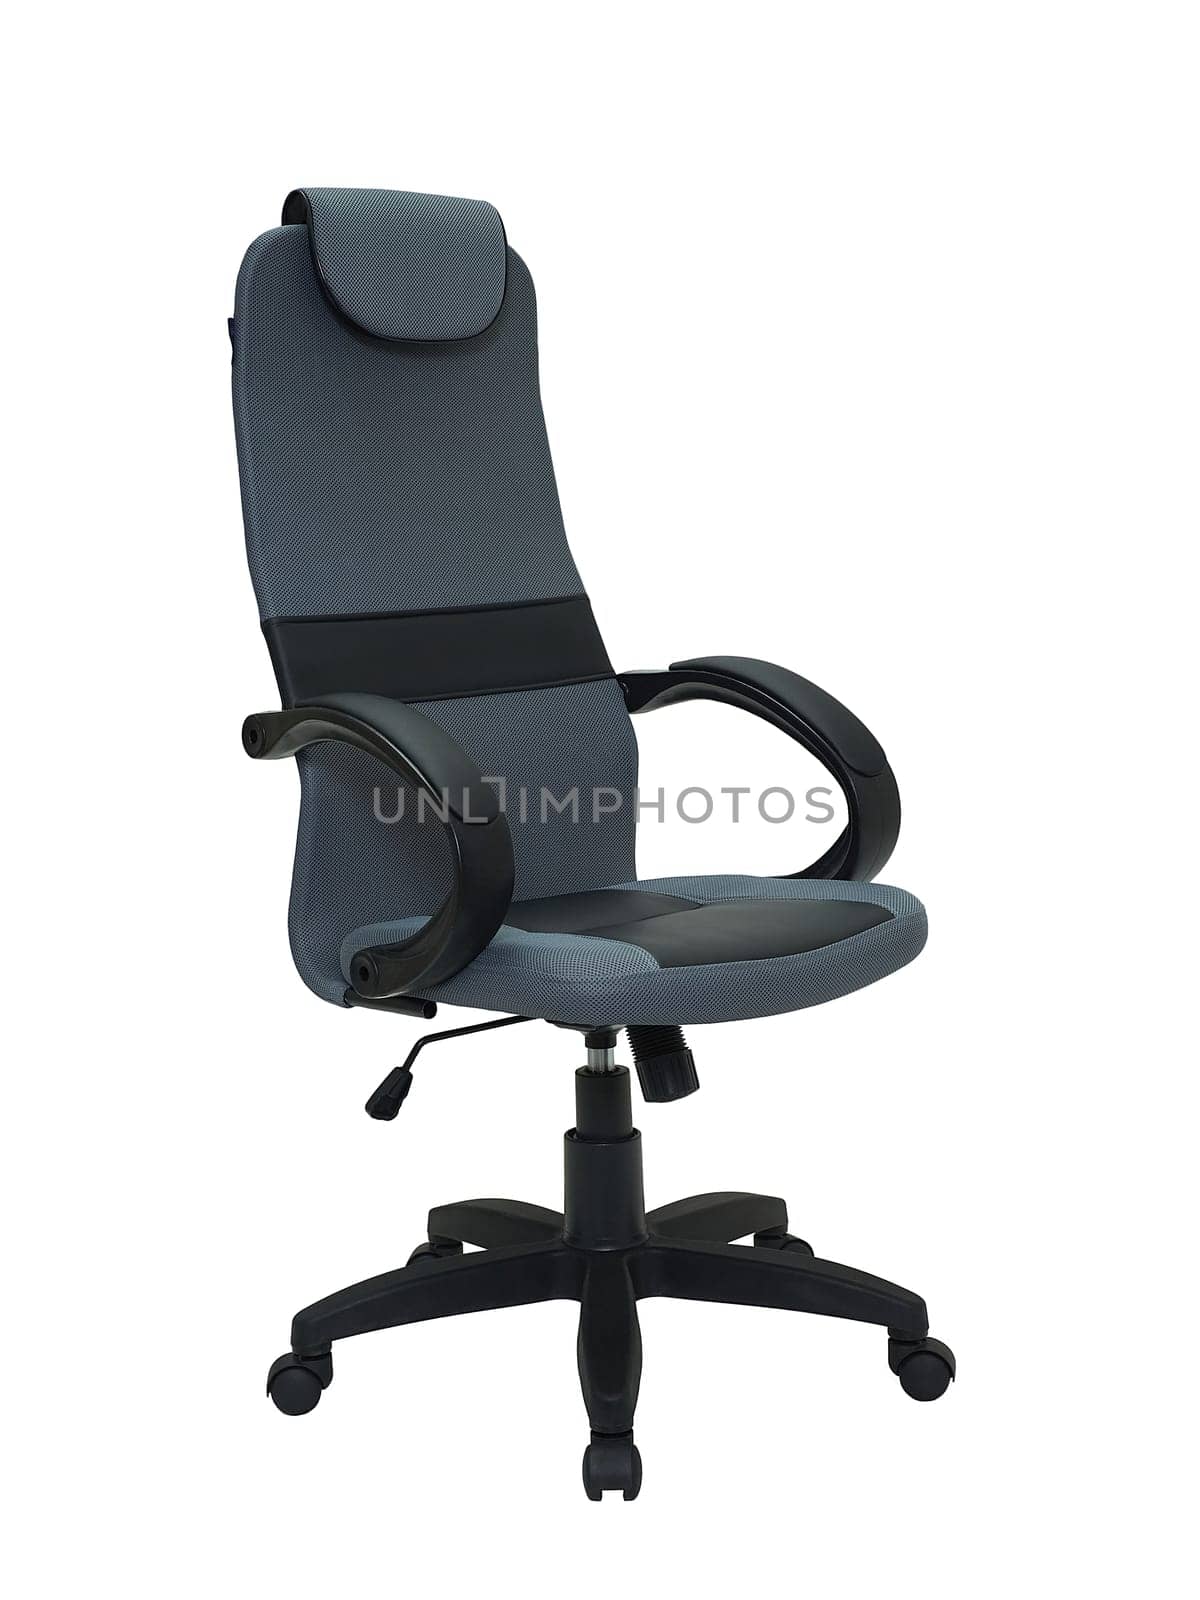 grey office armchair on wheels isolated on white background, side view. by artemzatsepilin